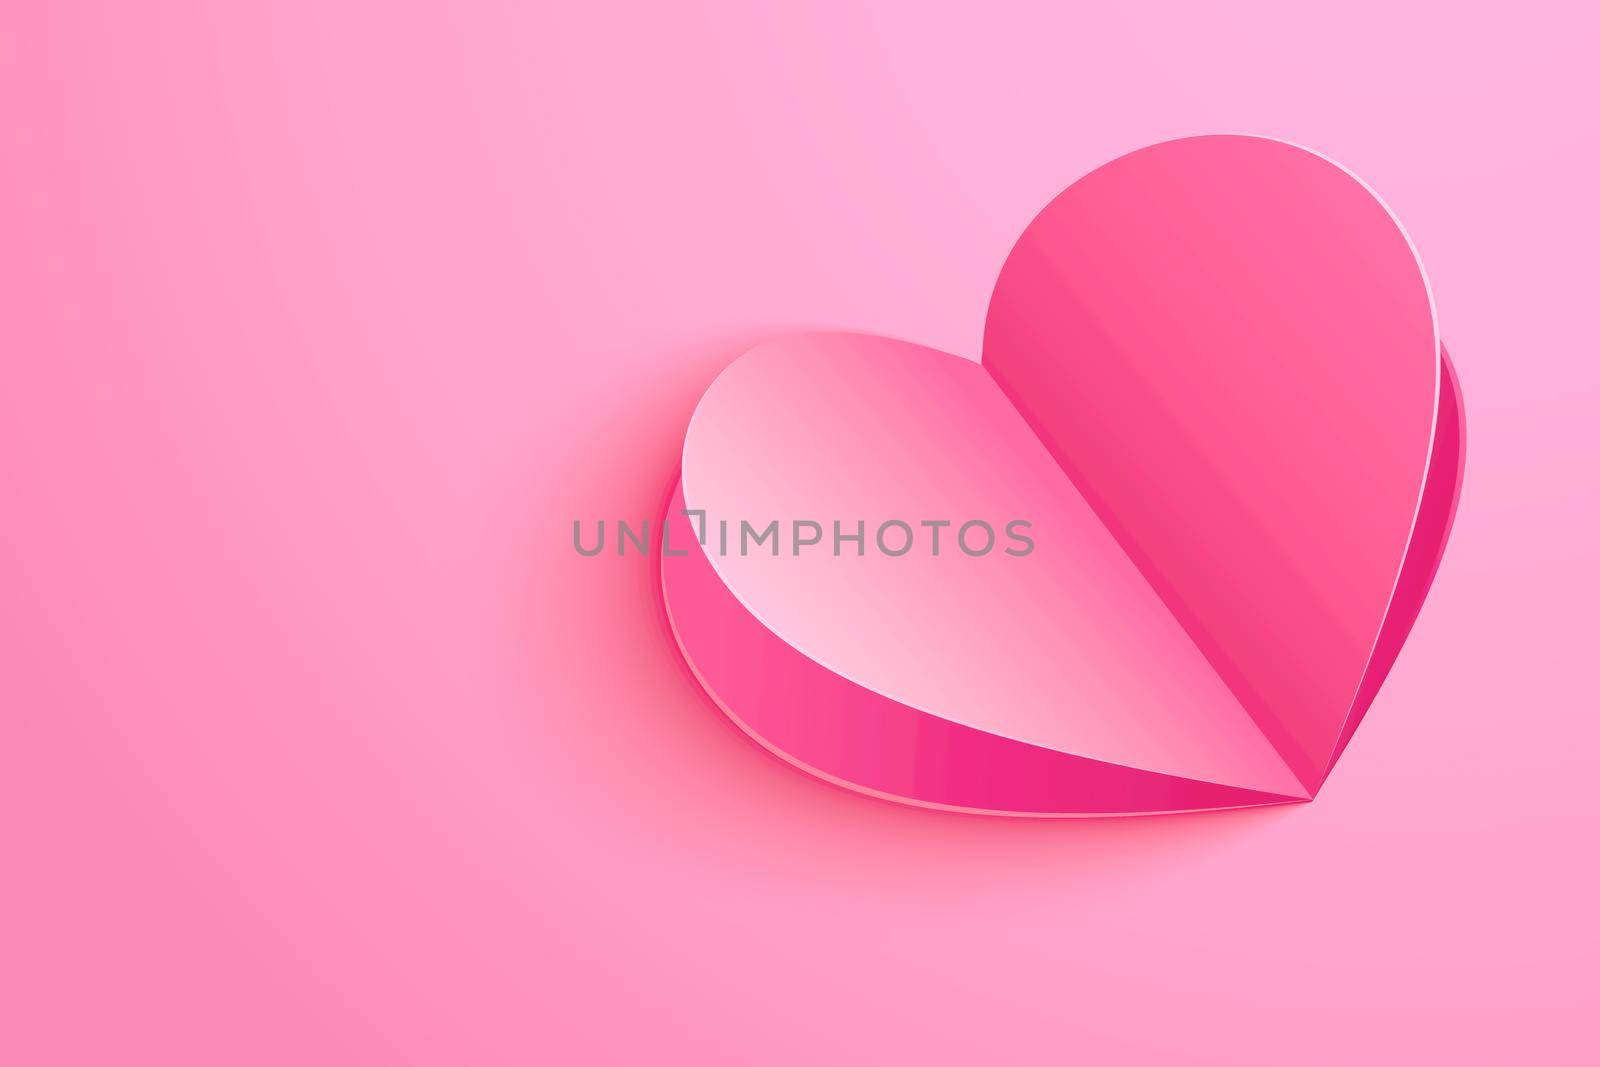 Valentines day background with paper shape hearts on pink pastel.